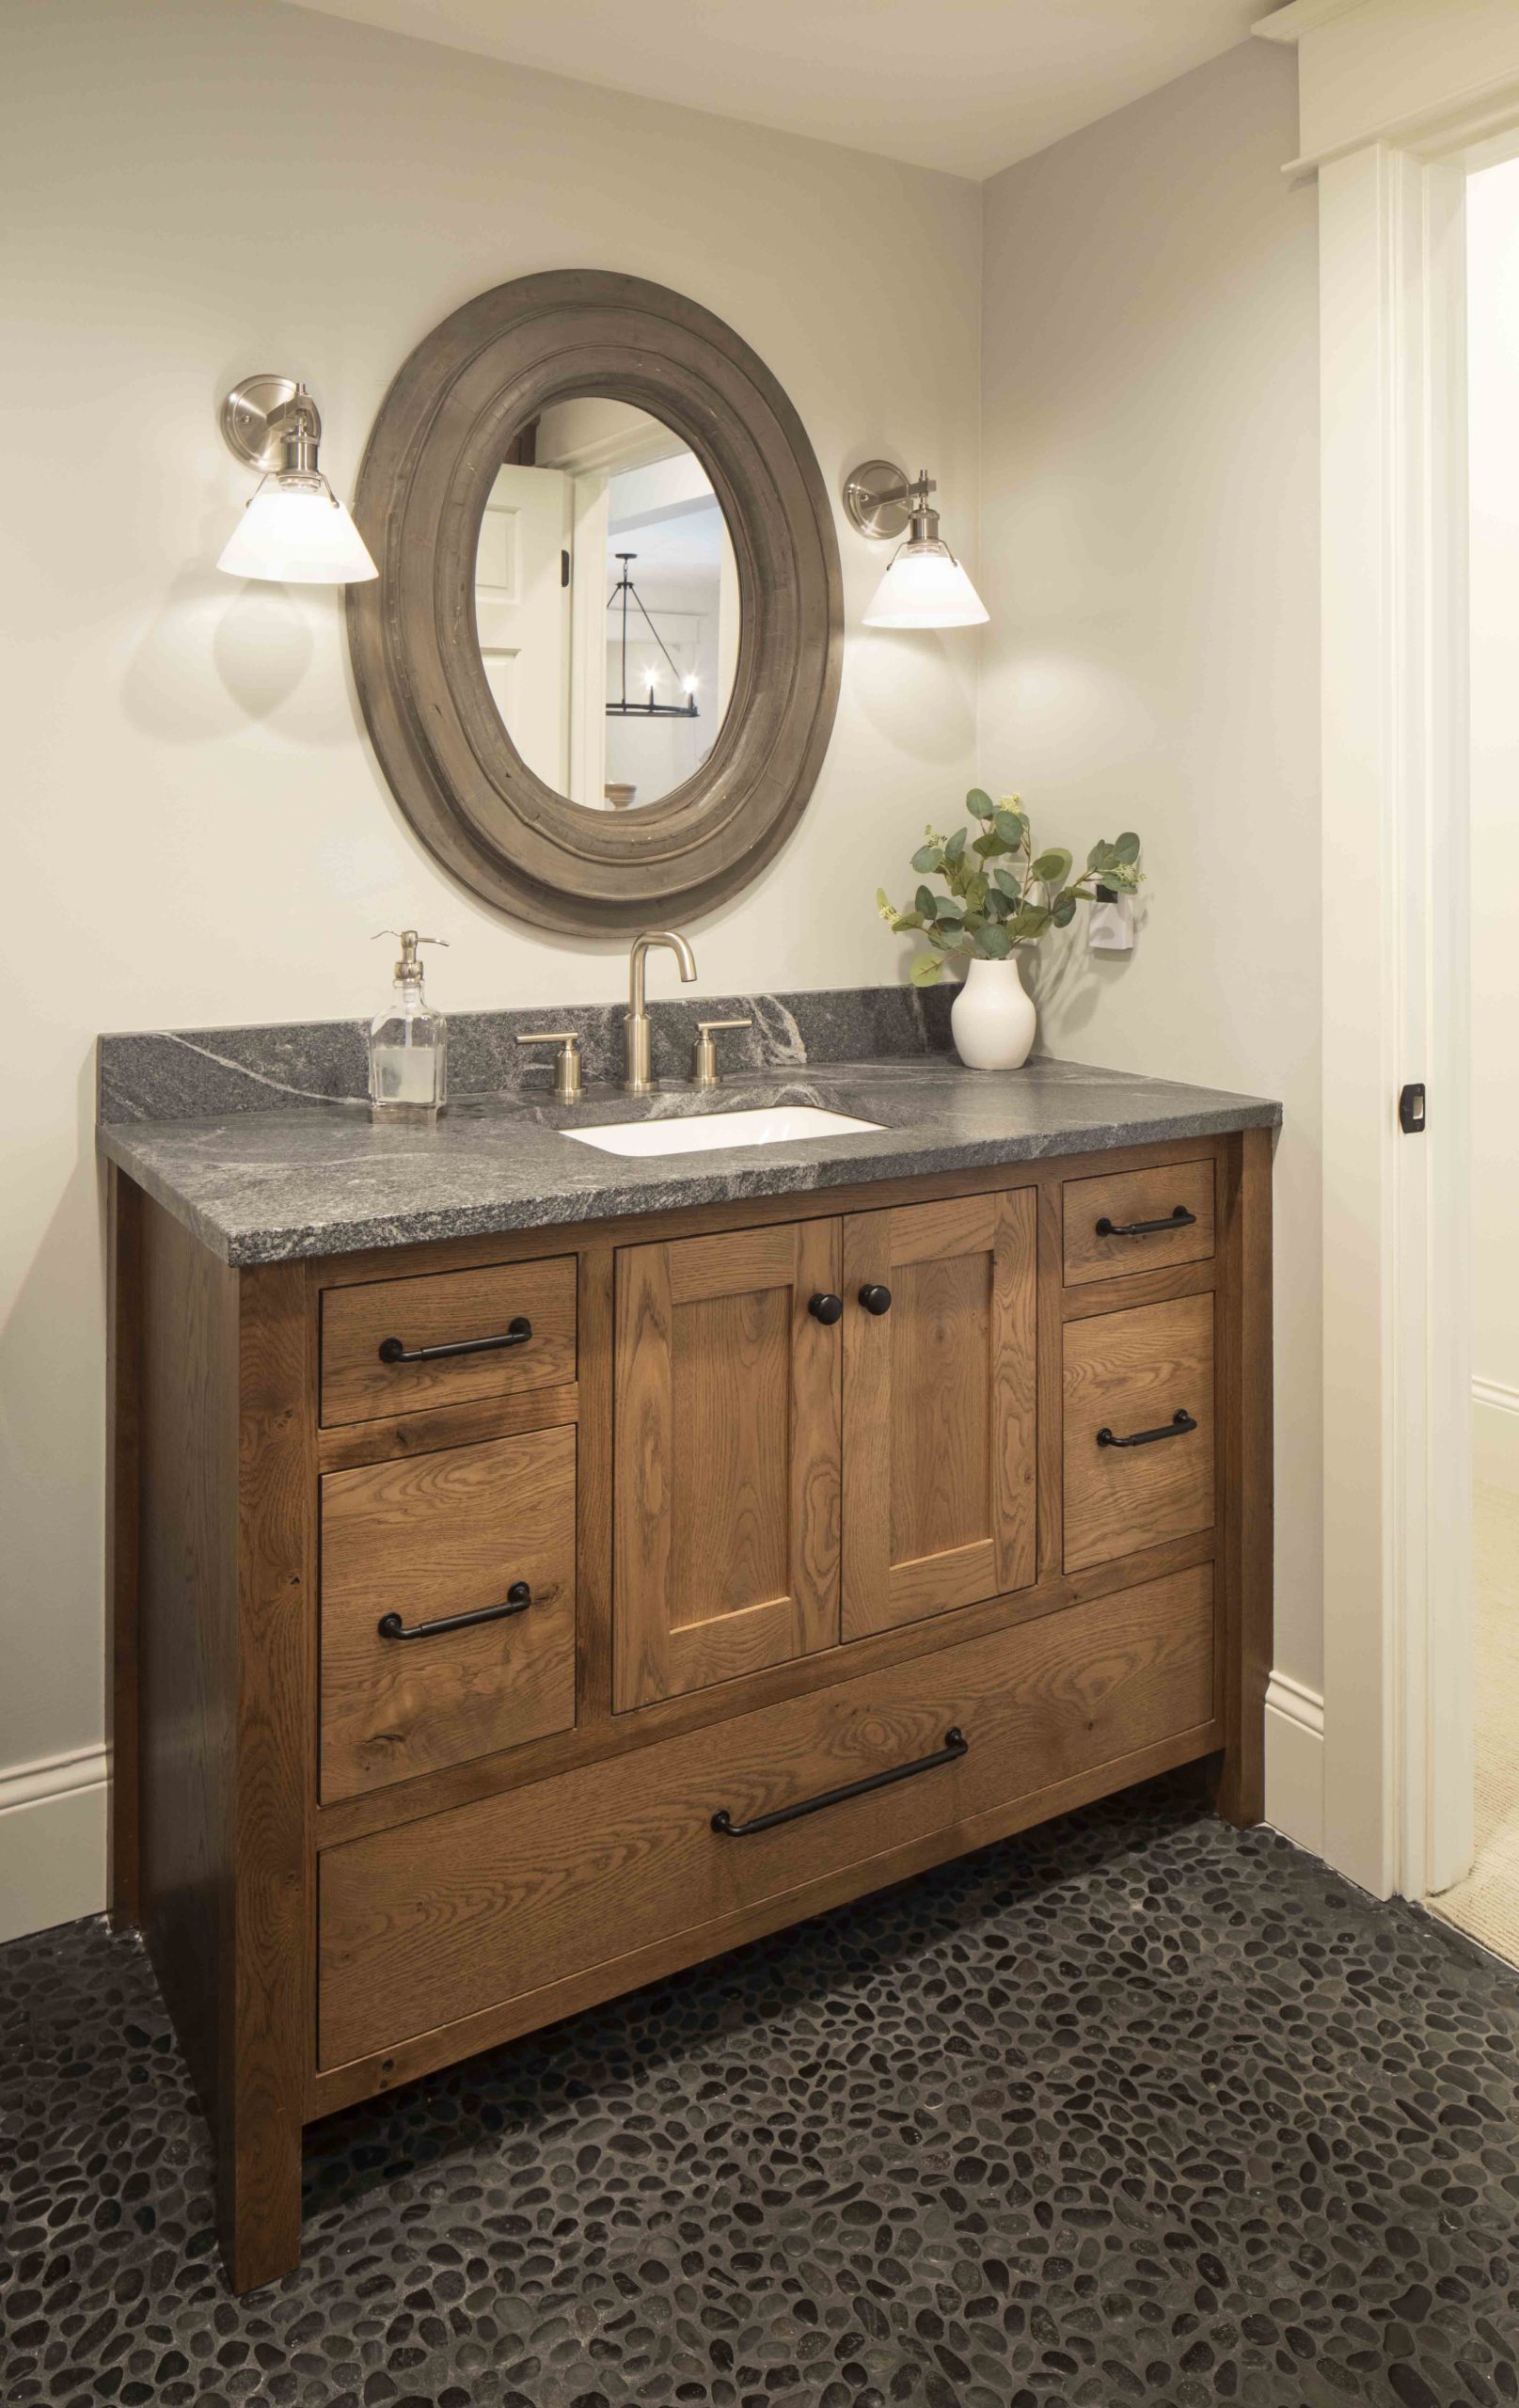 A prairie-style bathroom with a wooden vanity and a round mirror in a custom home.